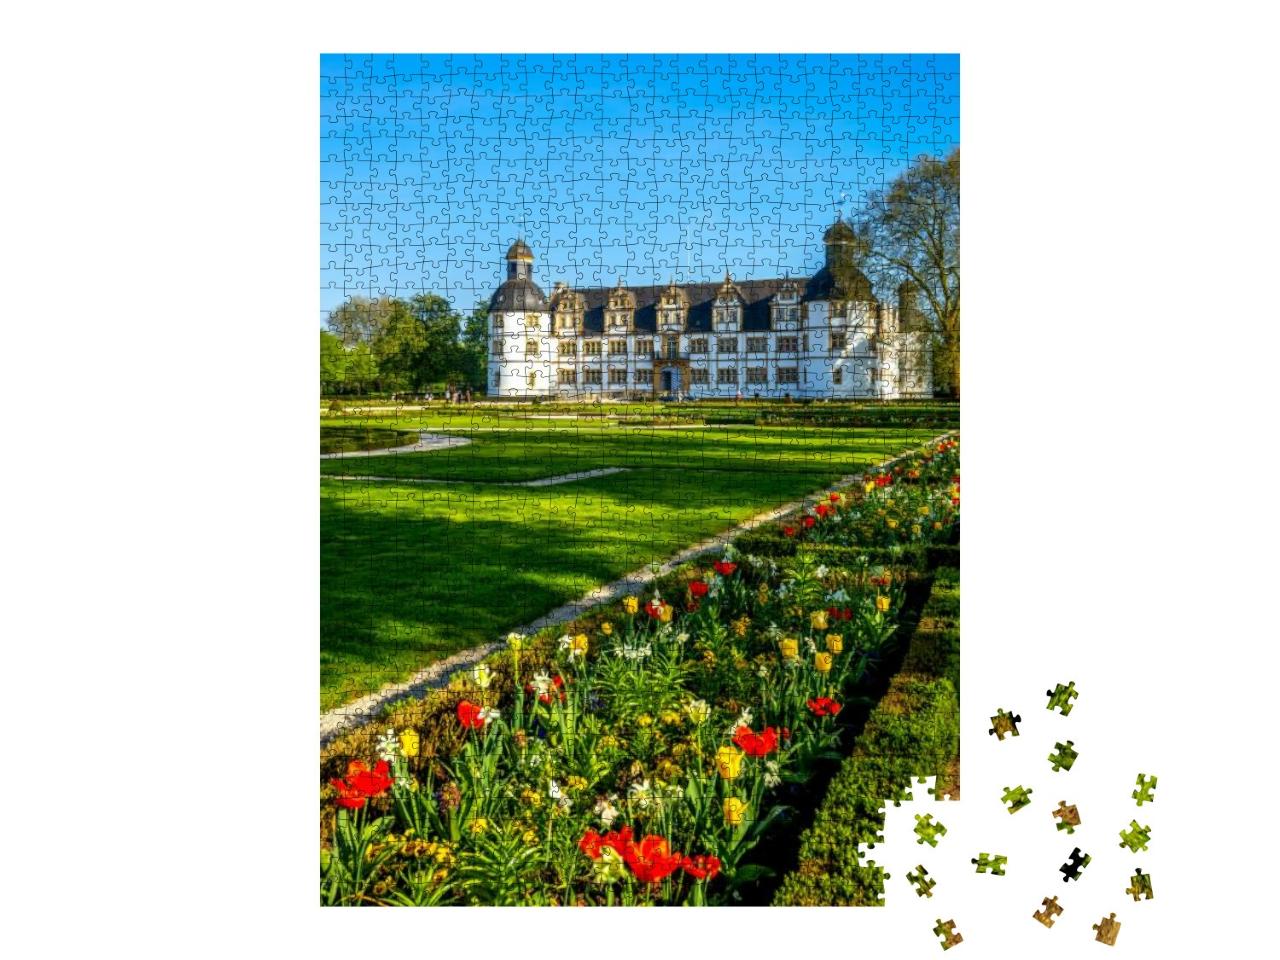 Castle Neuhaus in Paderborn, Germany... Jigsaw Puzzle with 1000 pieces